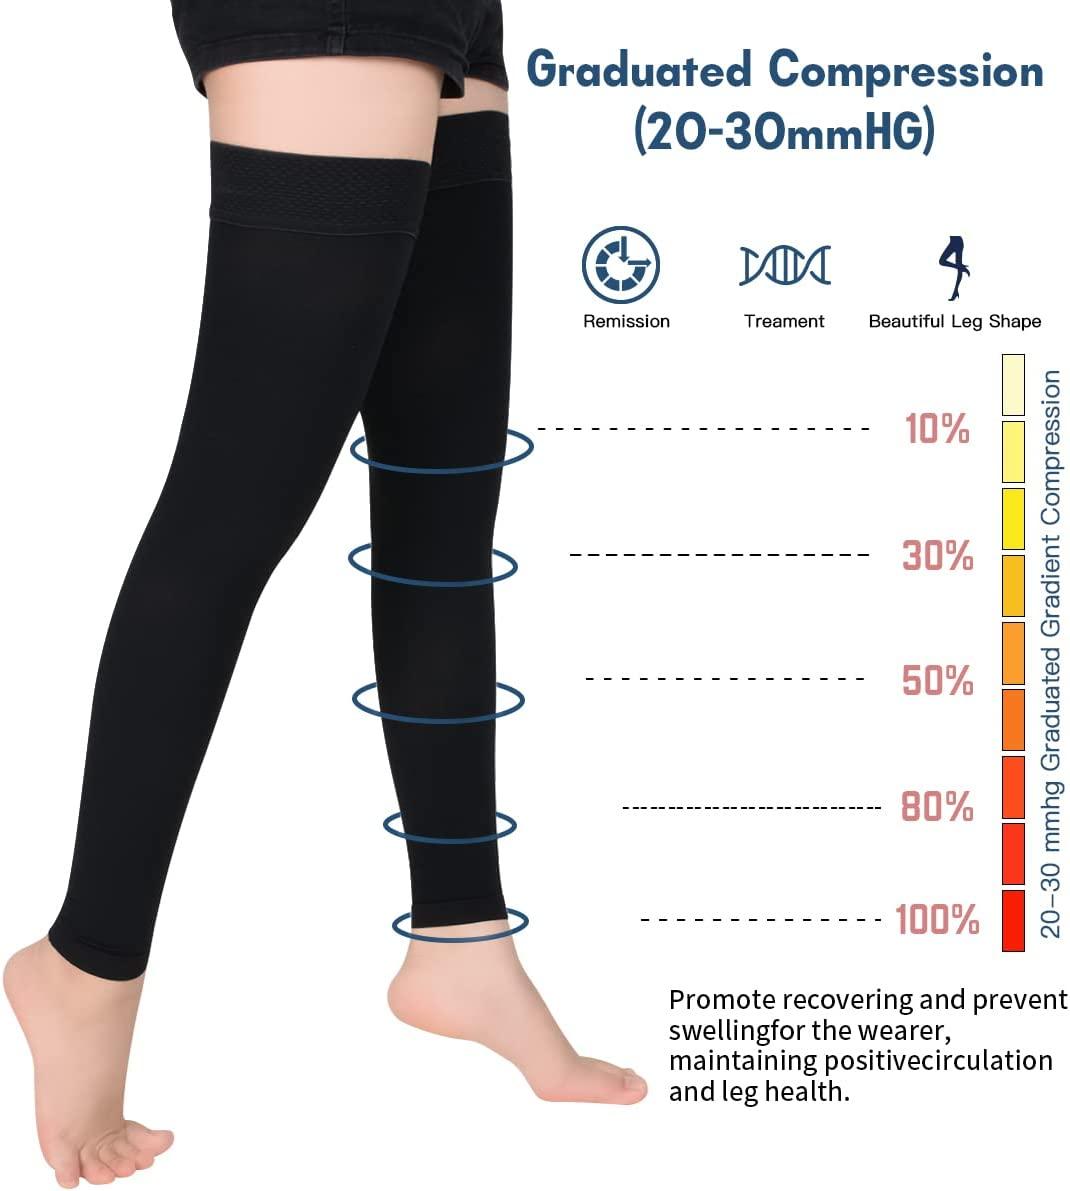 SKYFOXE Medical Thigh High Compression Stockings 20-30 mmHg for